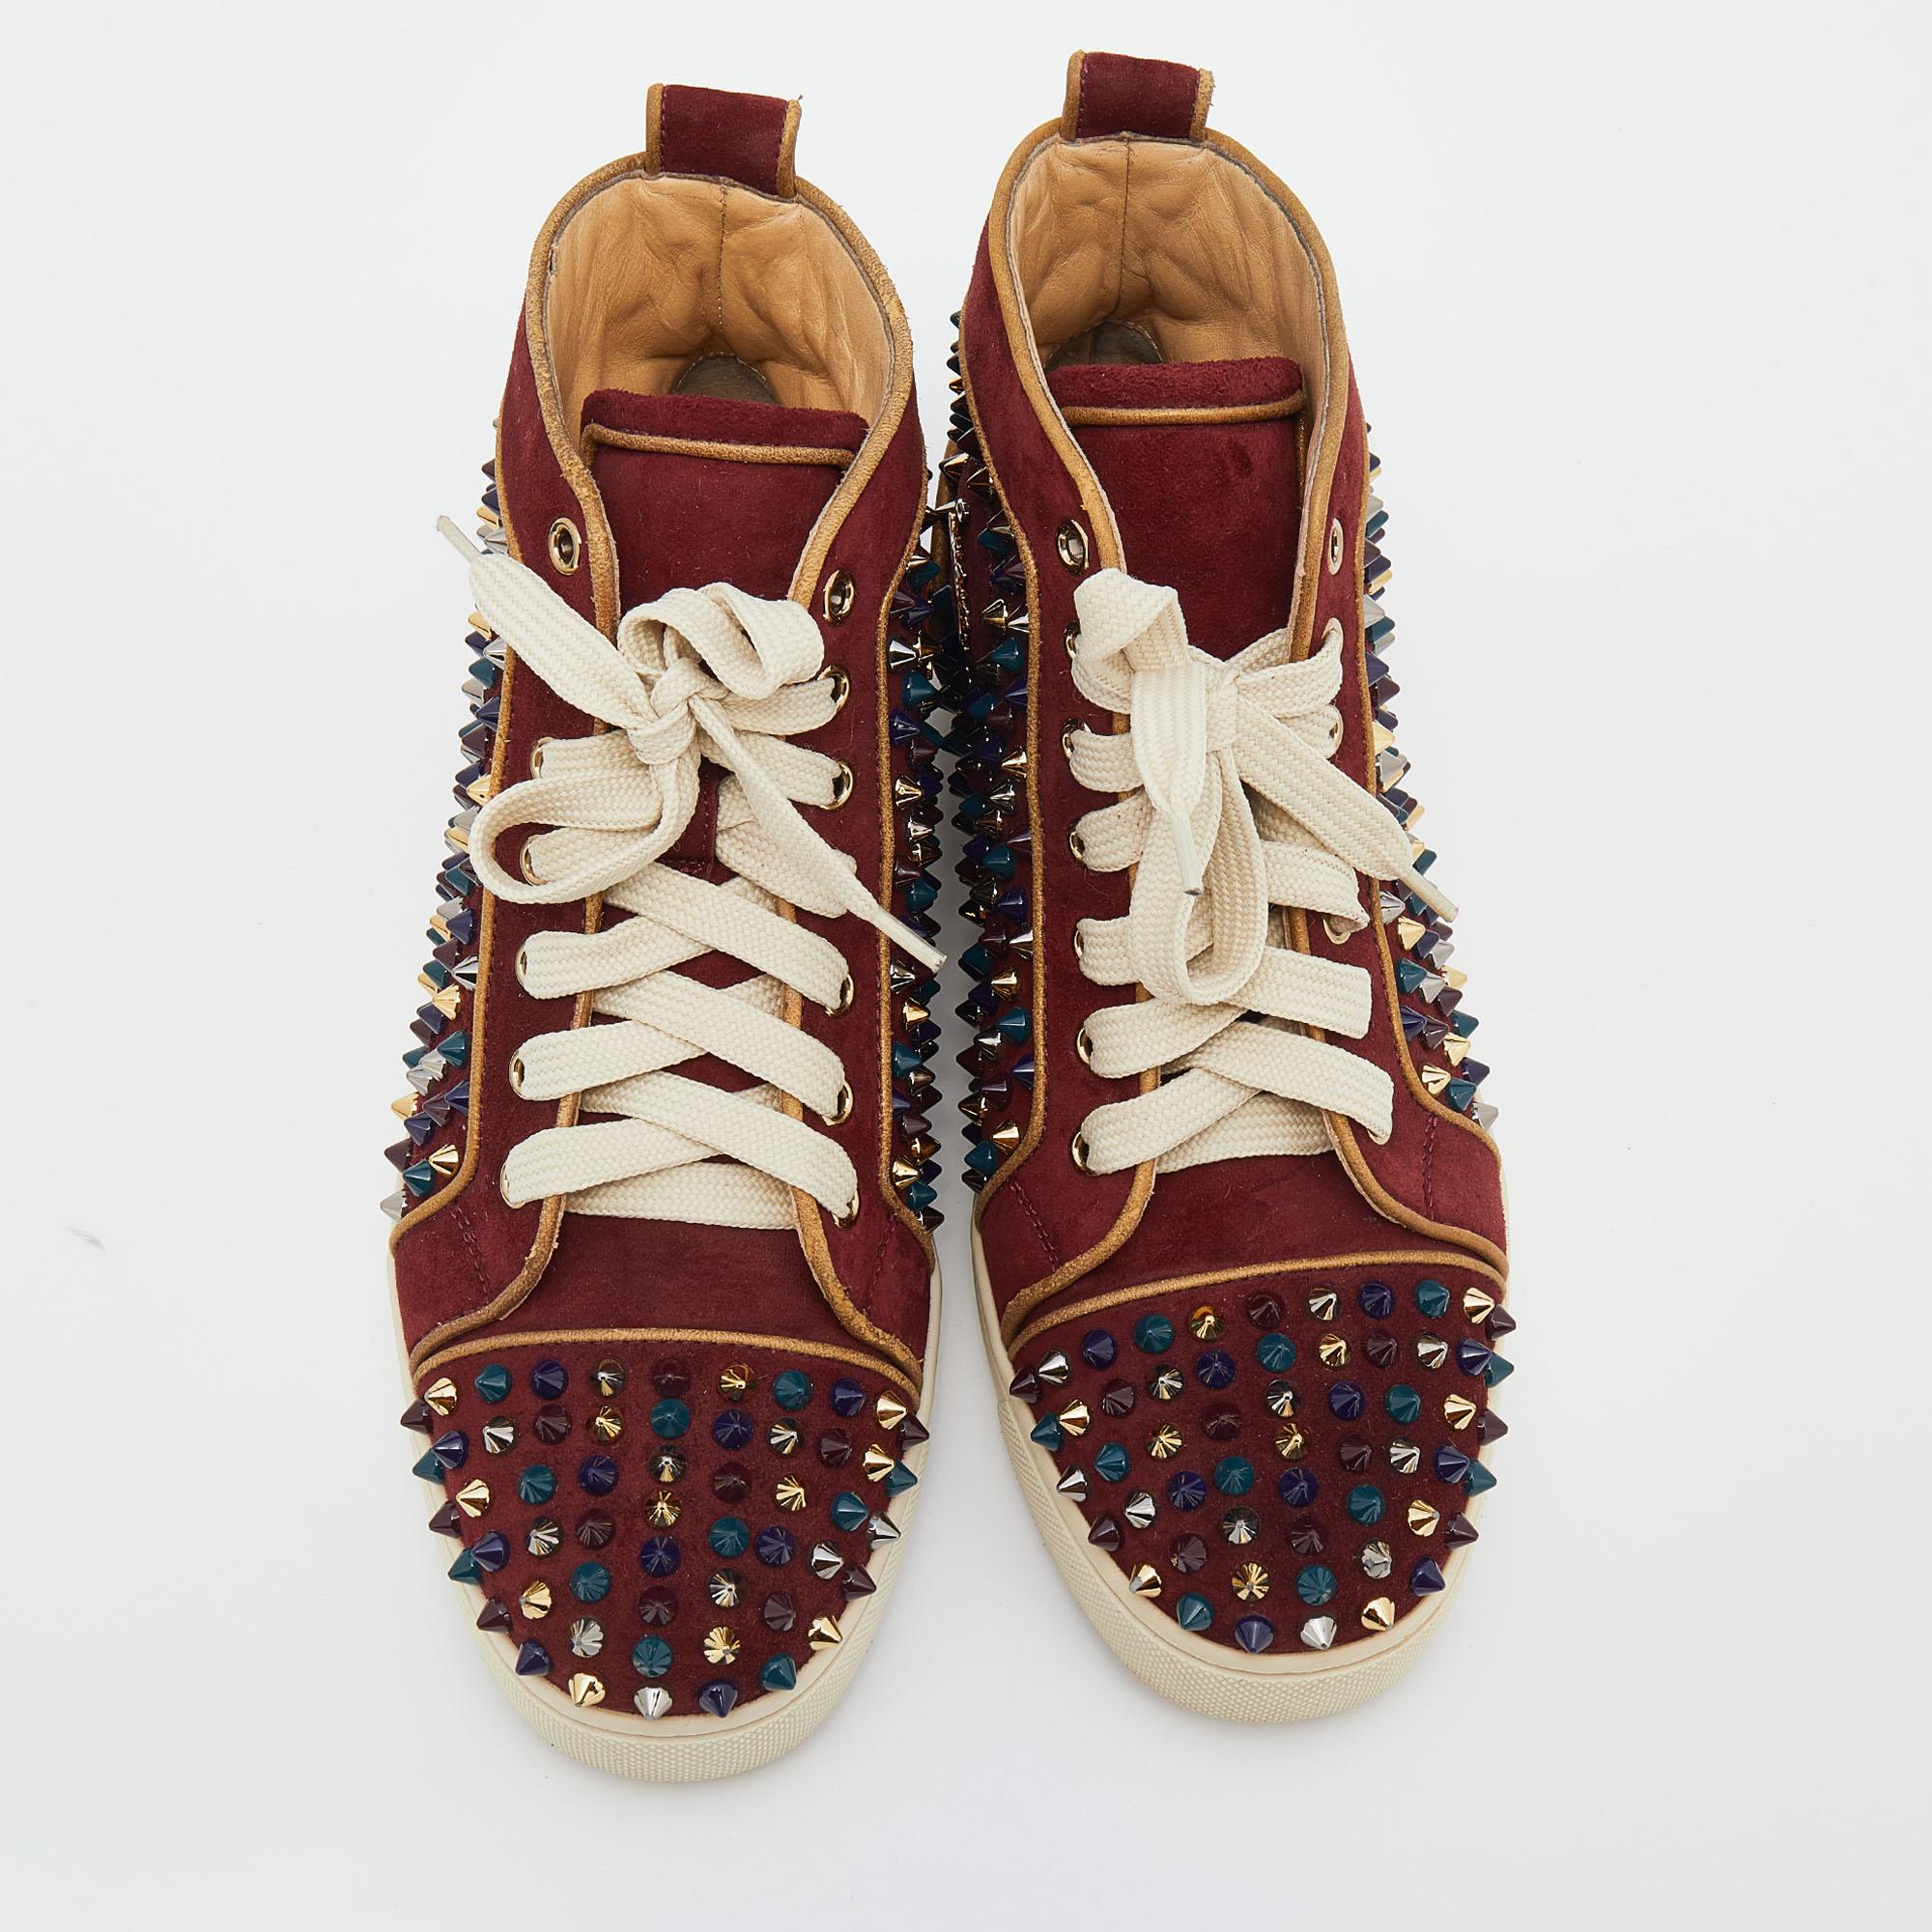 Feel great in your casual wear every time you step out in these sneakers from Christian Louboutin. They have been crafted from suede and styled in a high-top silhouette. The sneakers carry spike embellishments on the exterior, round toes, lace-ups